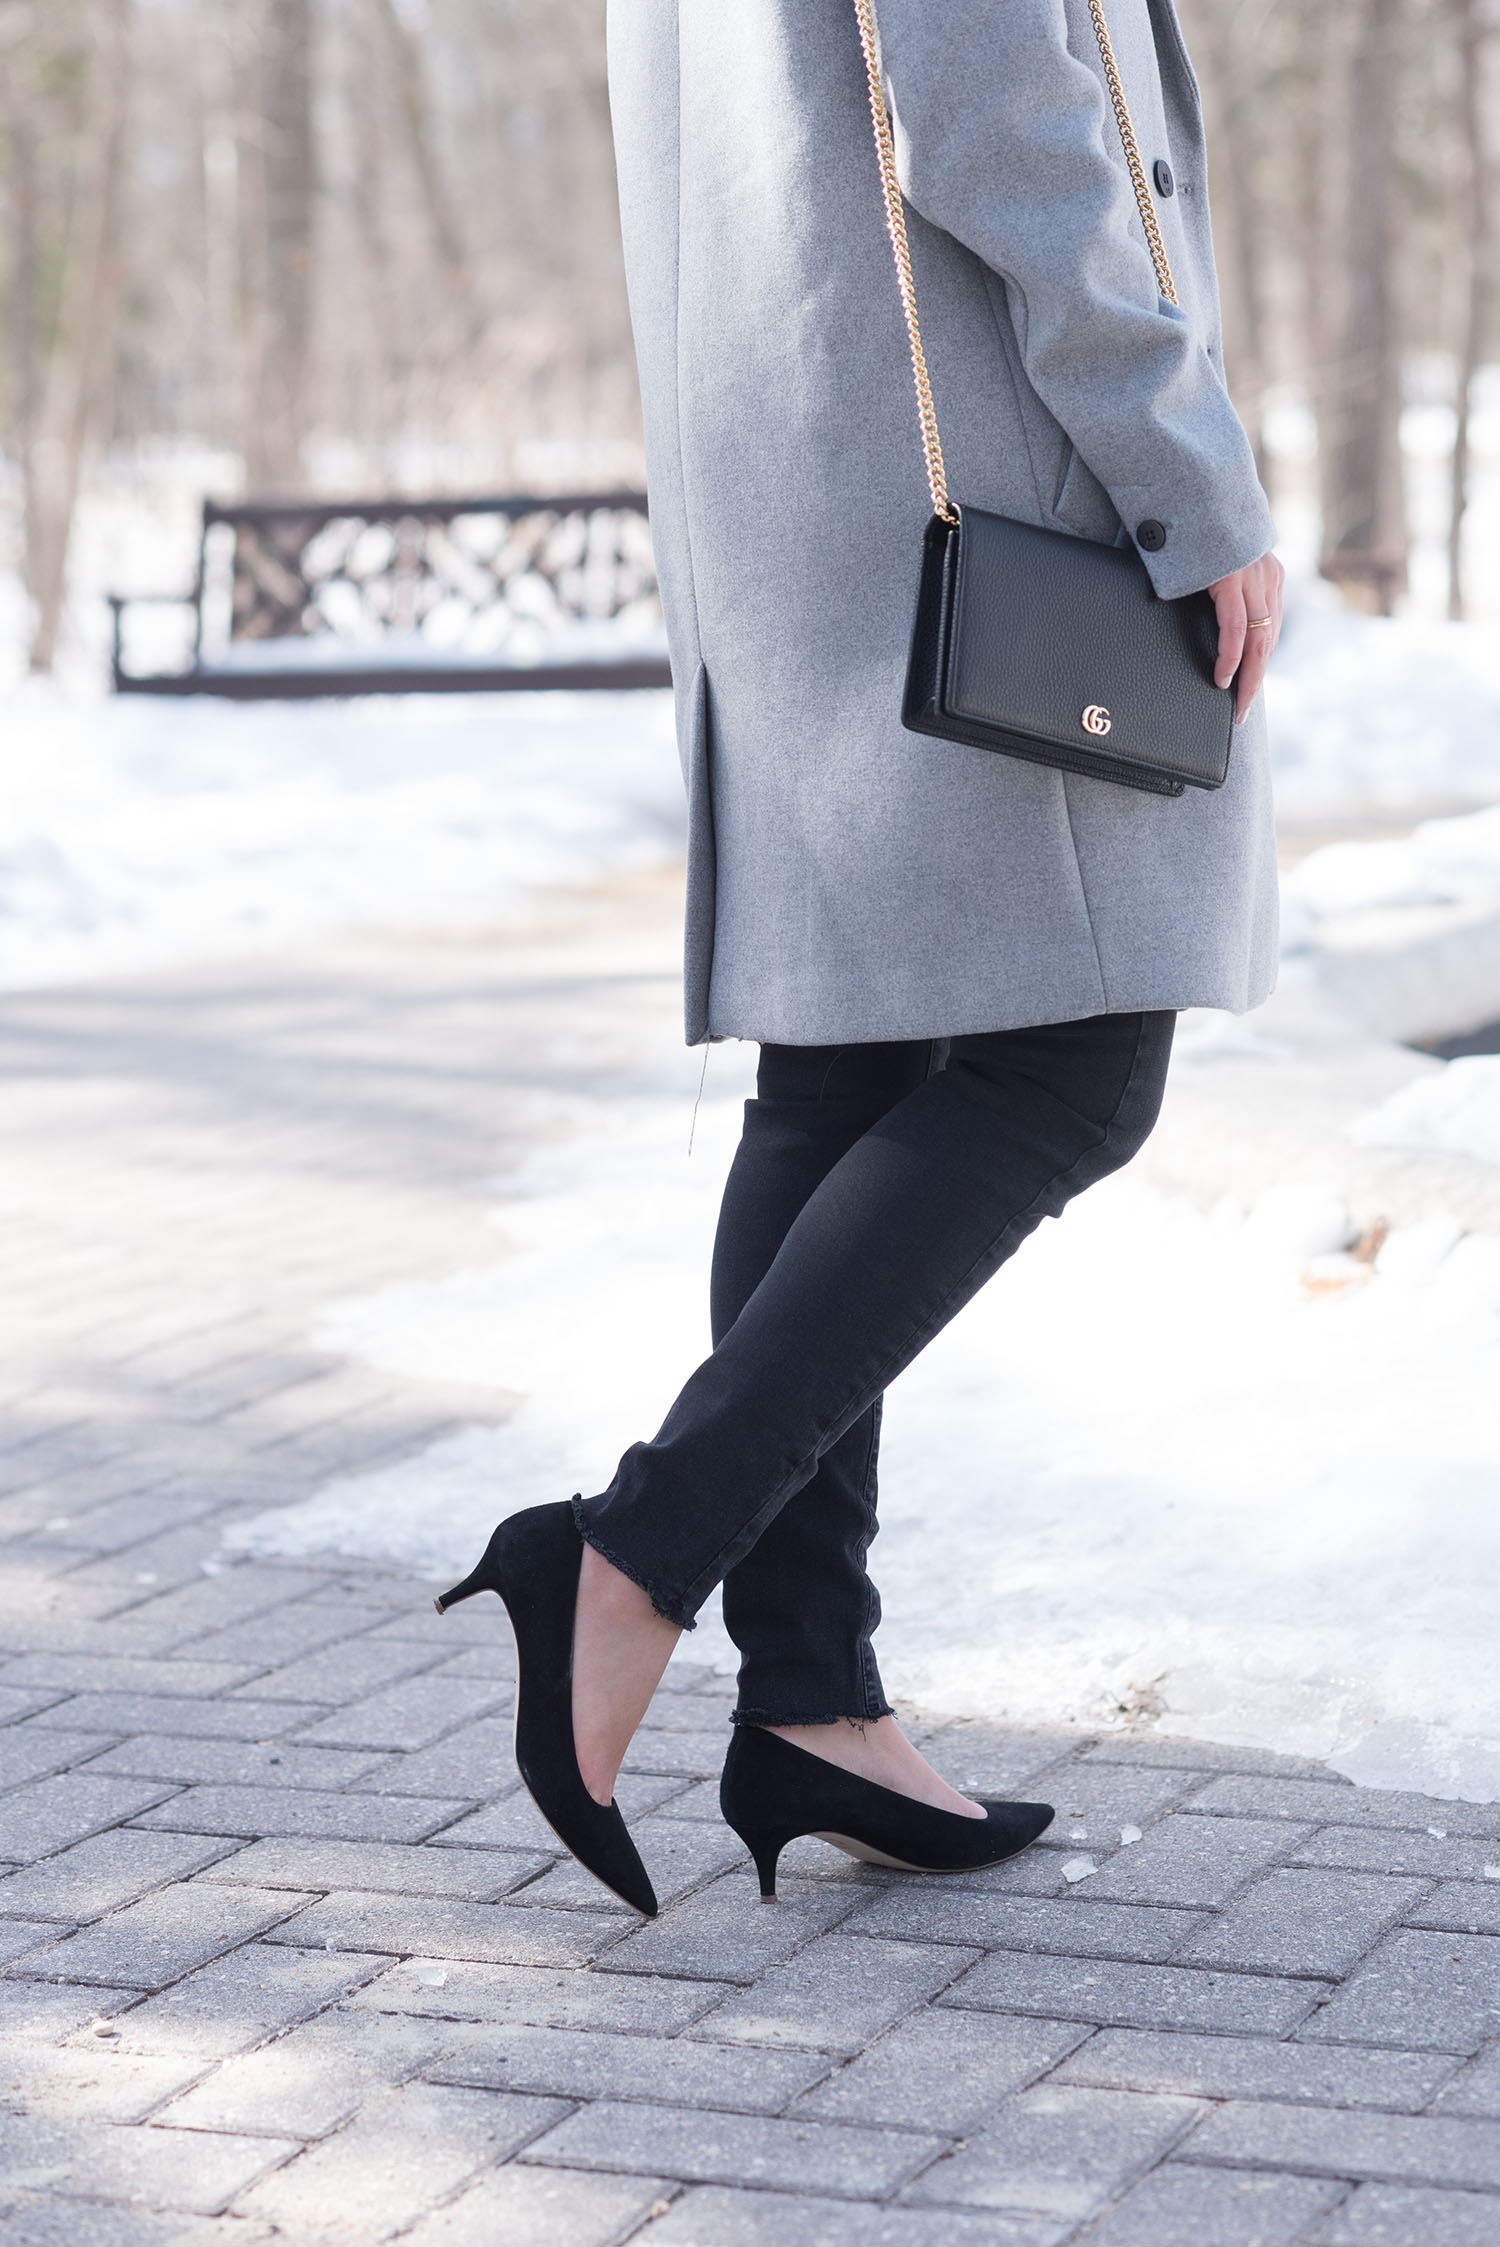 Outfit details on Canadian fashion blogger Cee Fardoe of Coco & Vera, featuring a Gucci crossbody bag and J. Crew kitten heel pumps